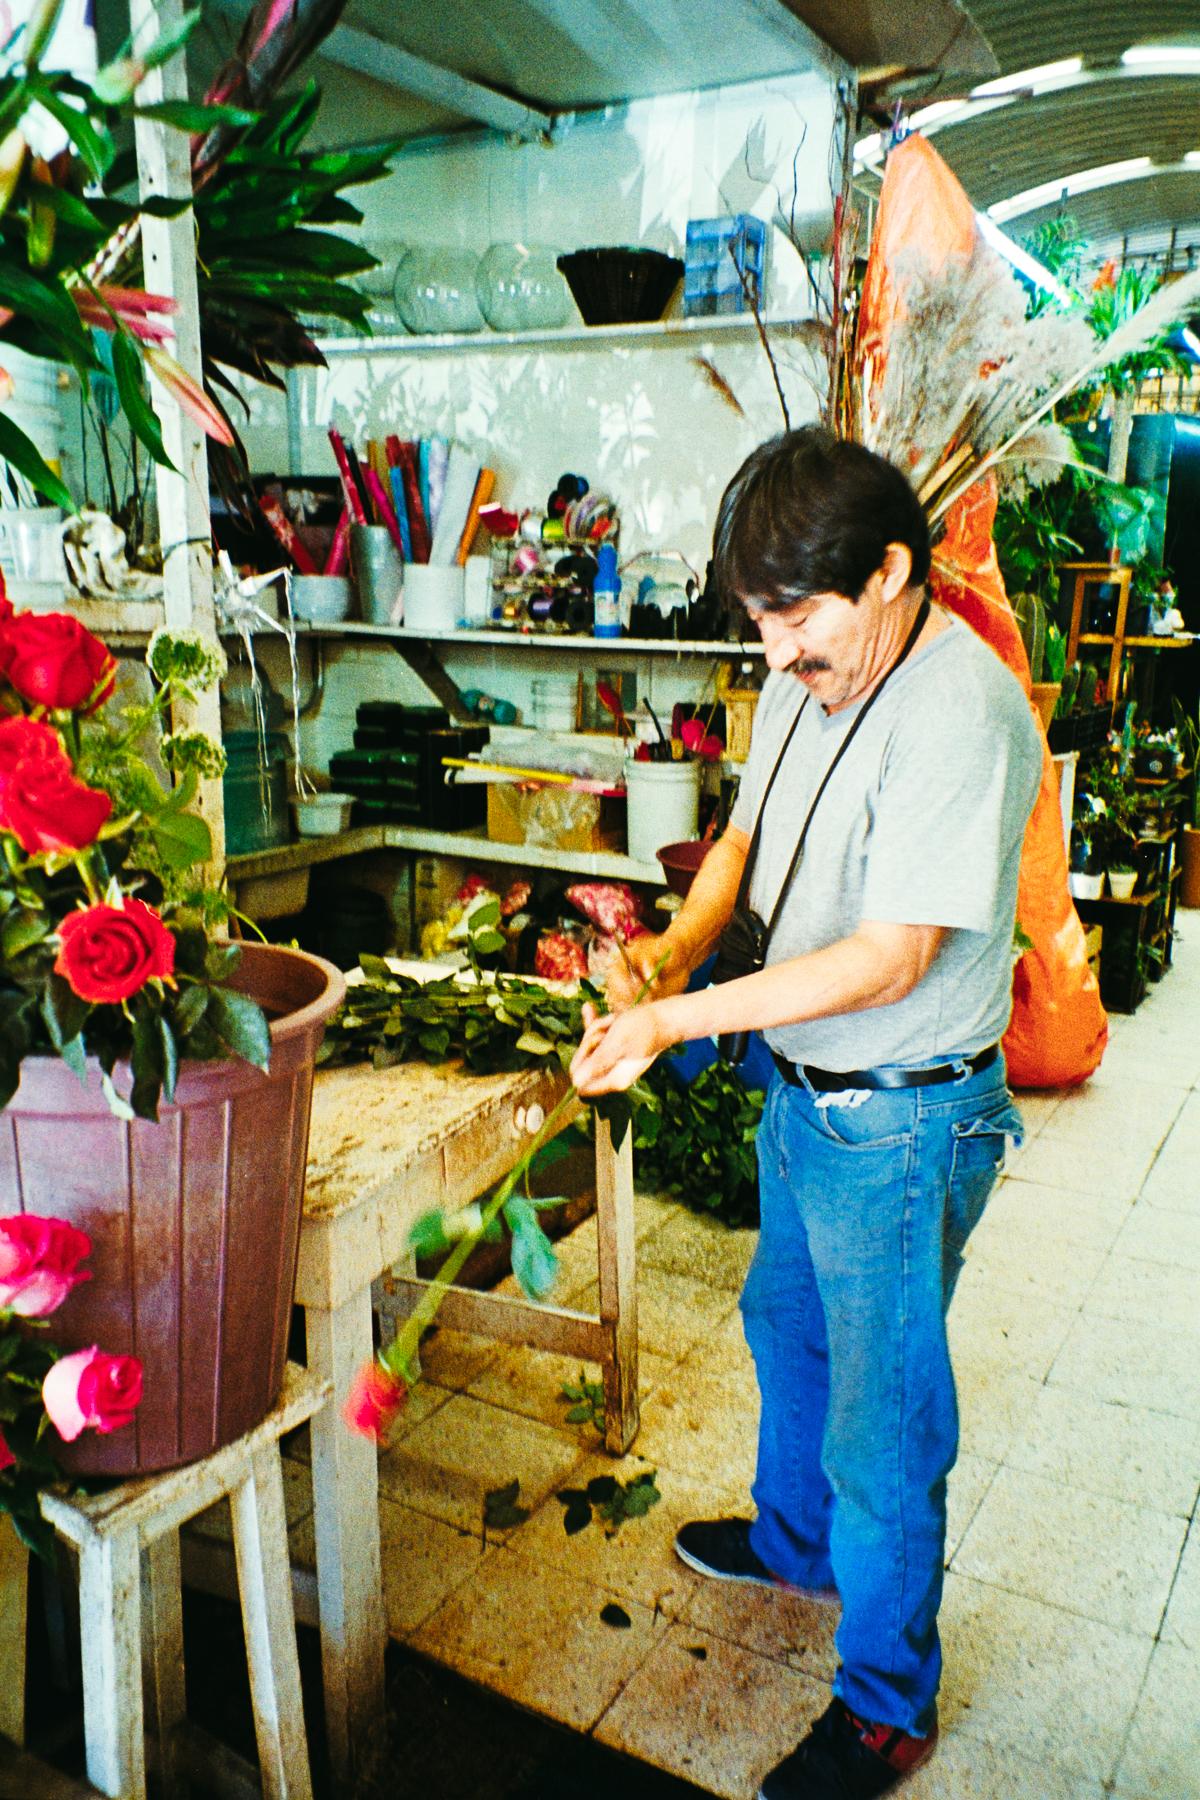 analog street photograph of a flower vendor preparing red roses in a market in Mexico City